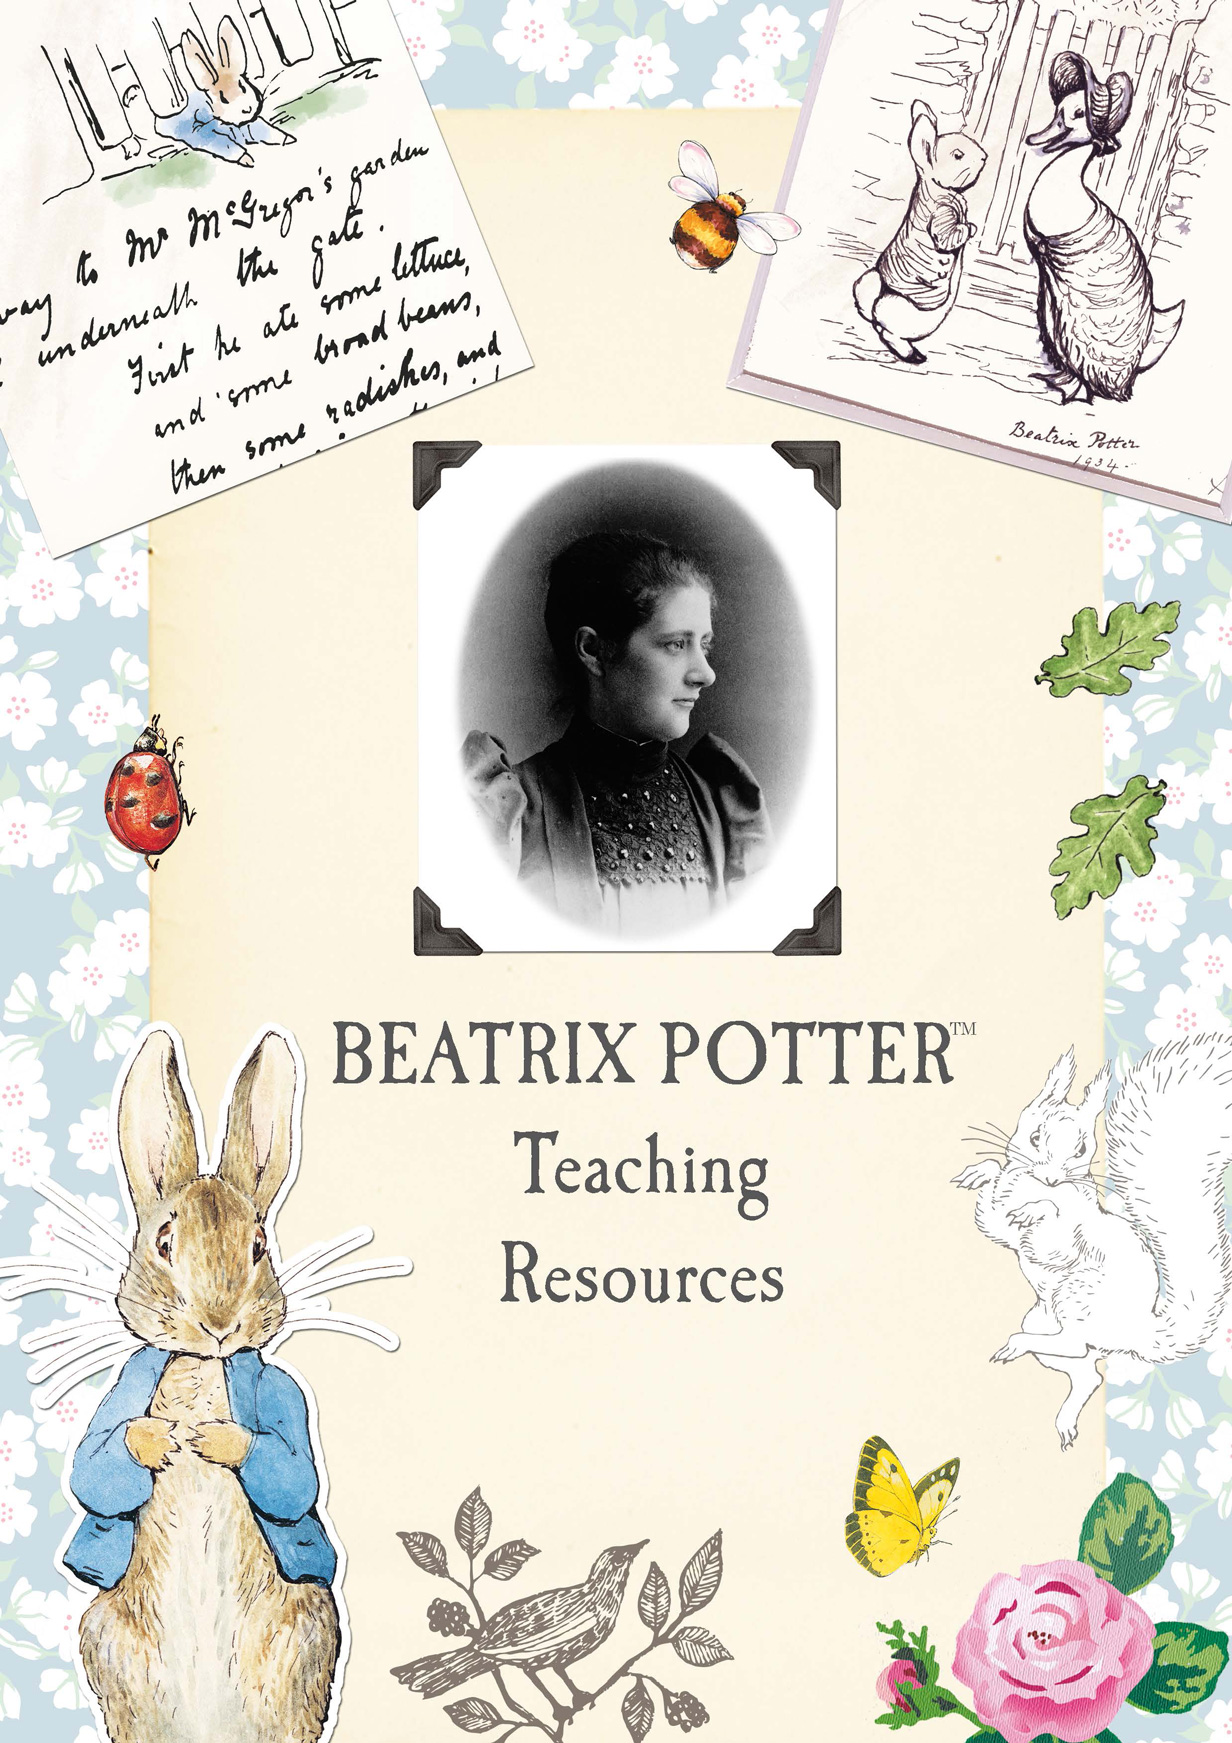 The cover image of the Beatrix Potter Teaching Pack on the Peter Rabbit website